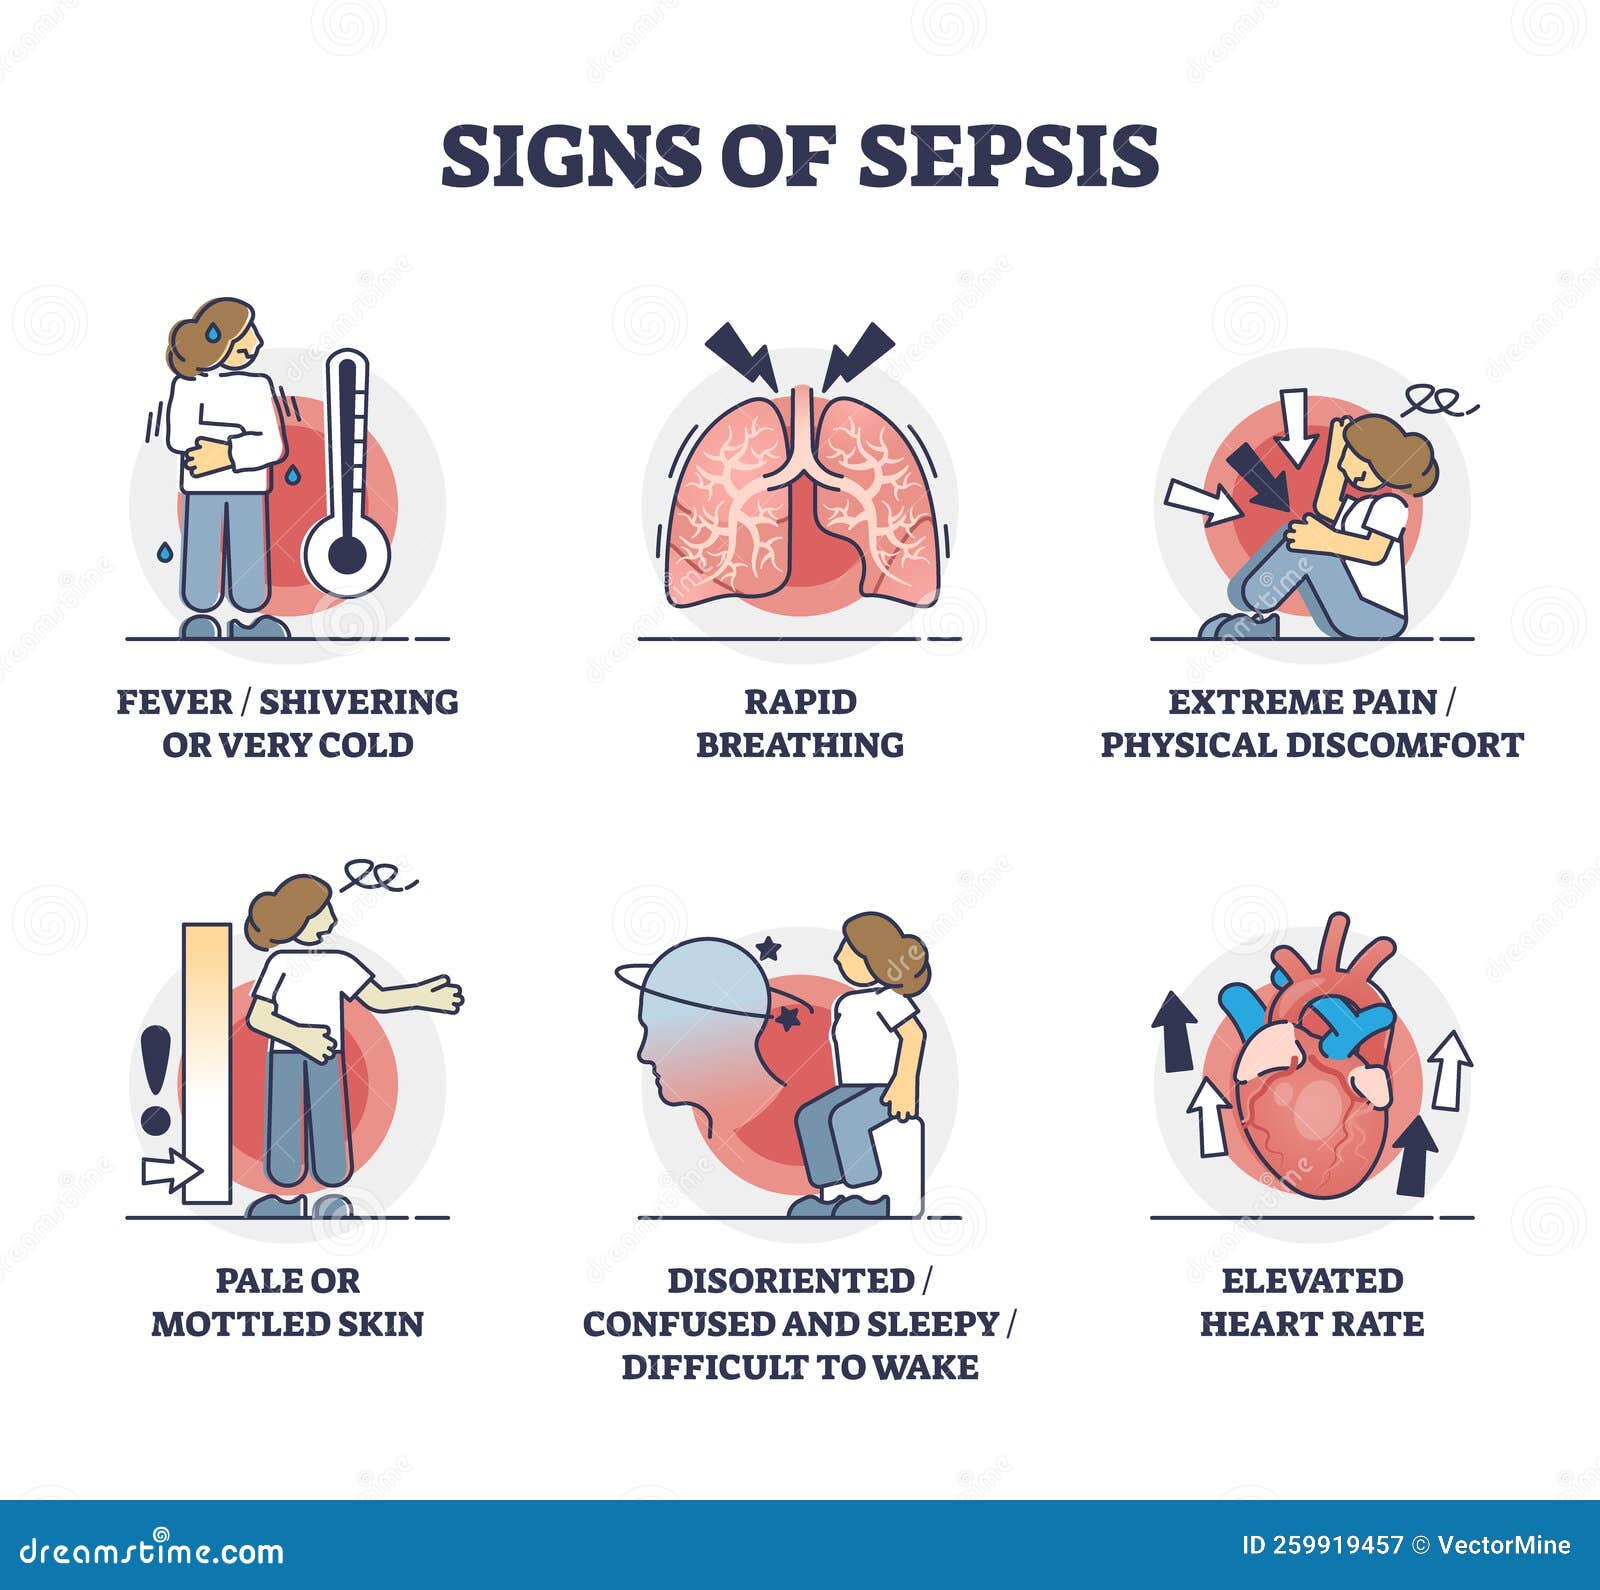 signs of sepsis as infection blood poisoning symptoms outline collection